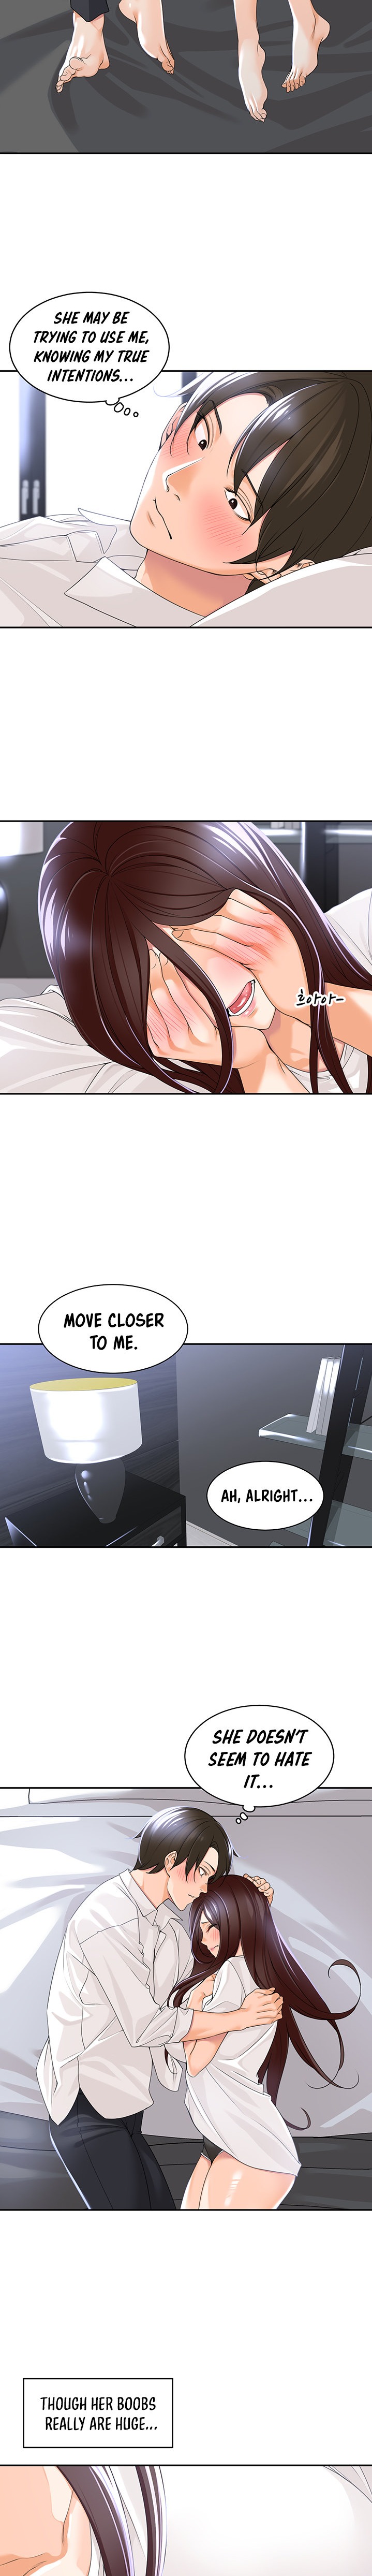 Manager, Please Scold Me - Chapter 2 Page 17